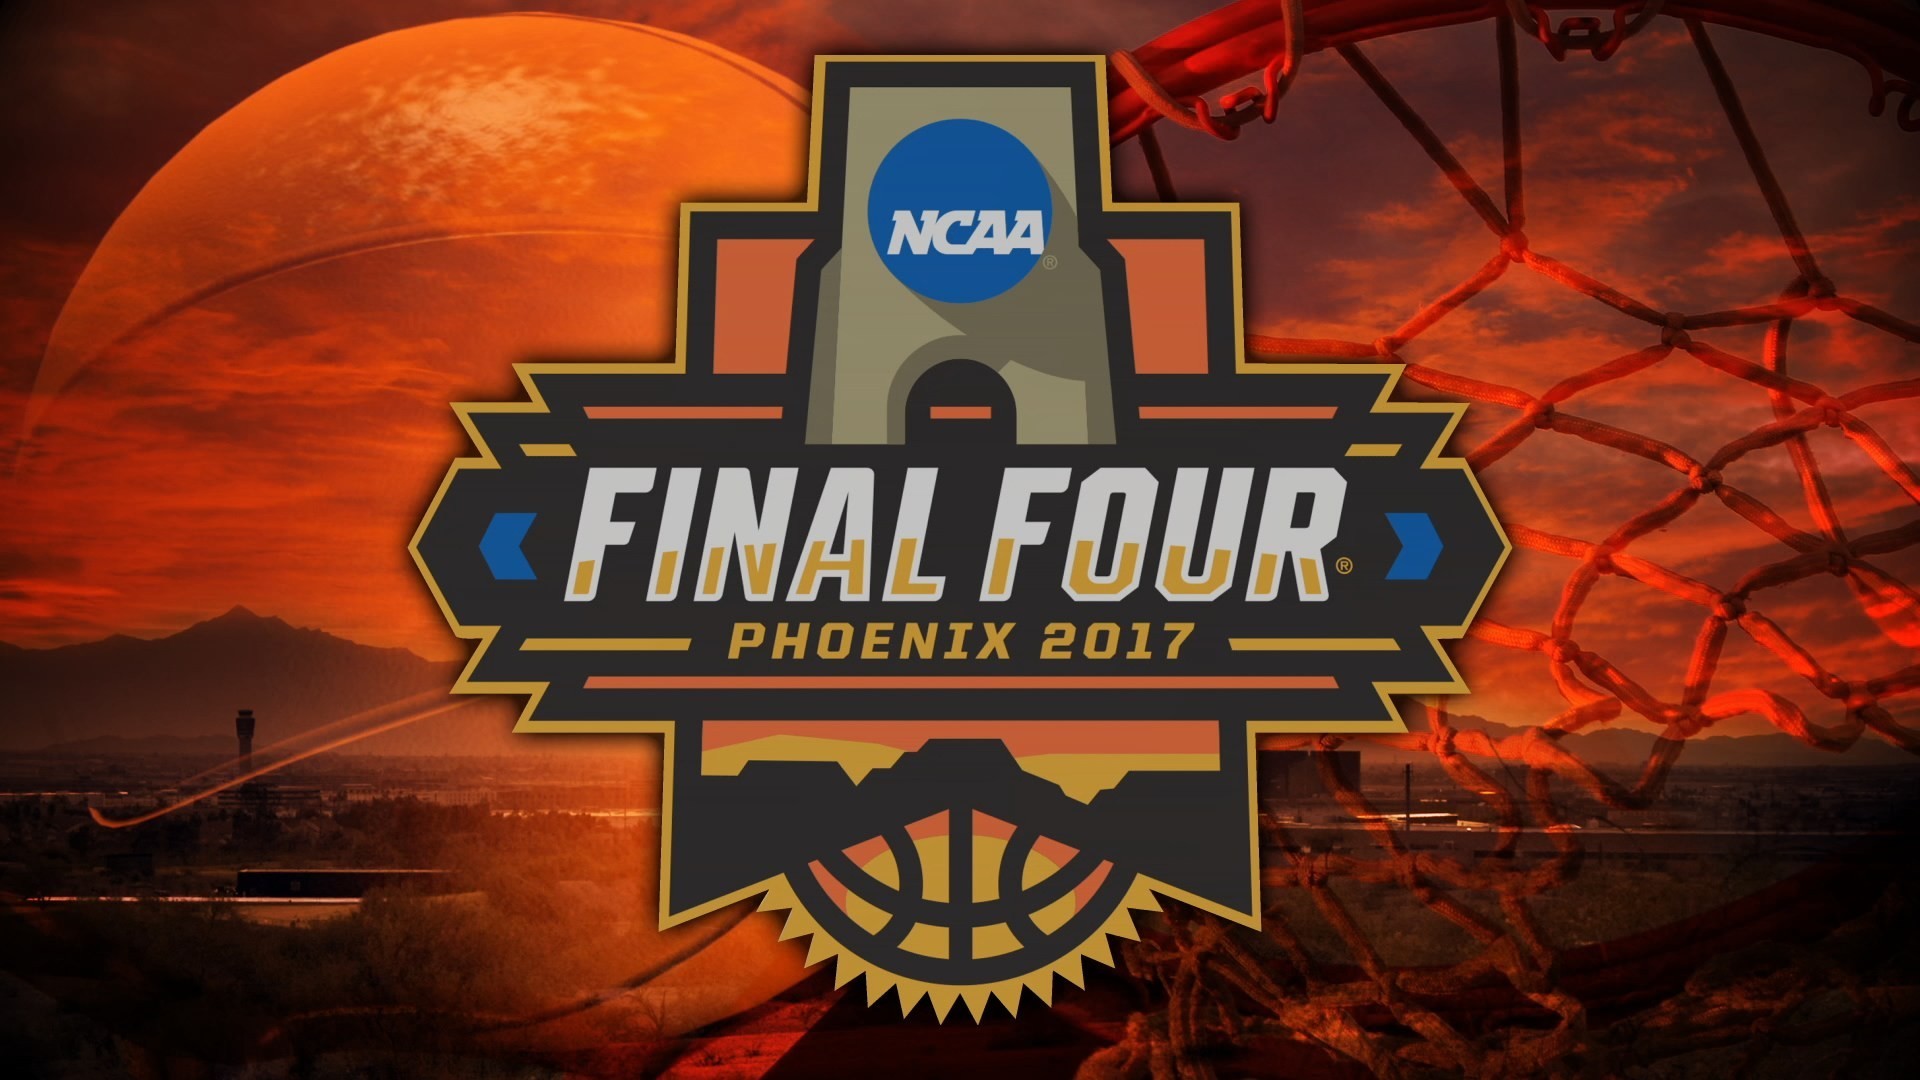 1920x1080 AG issues scam alert for fake Final Four basketball tickets